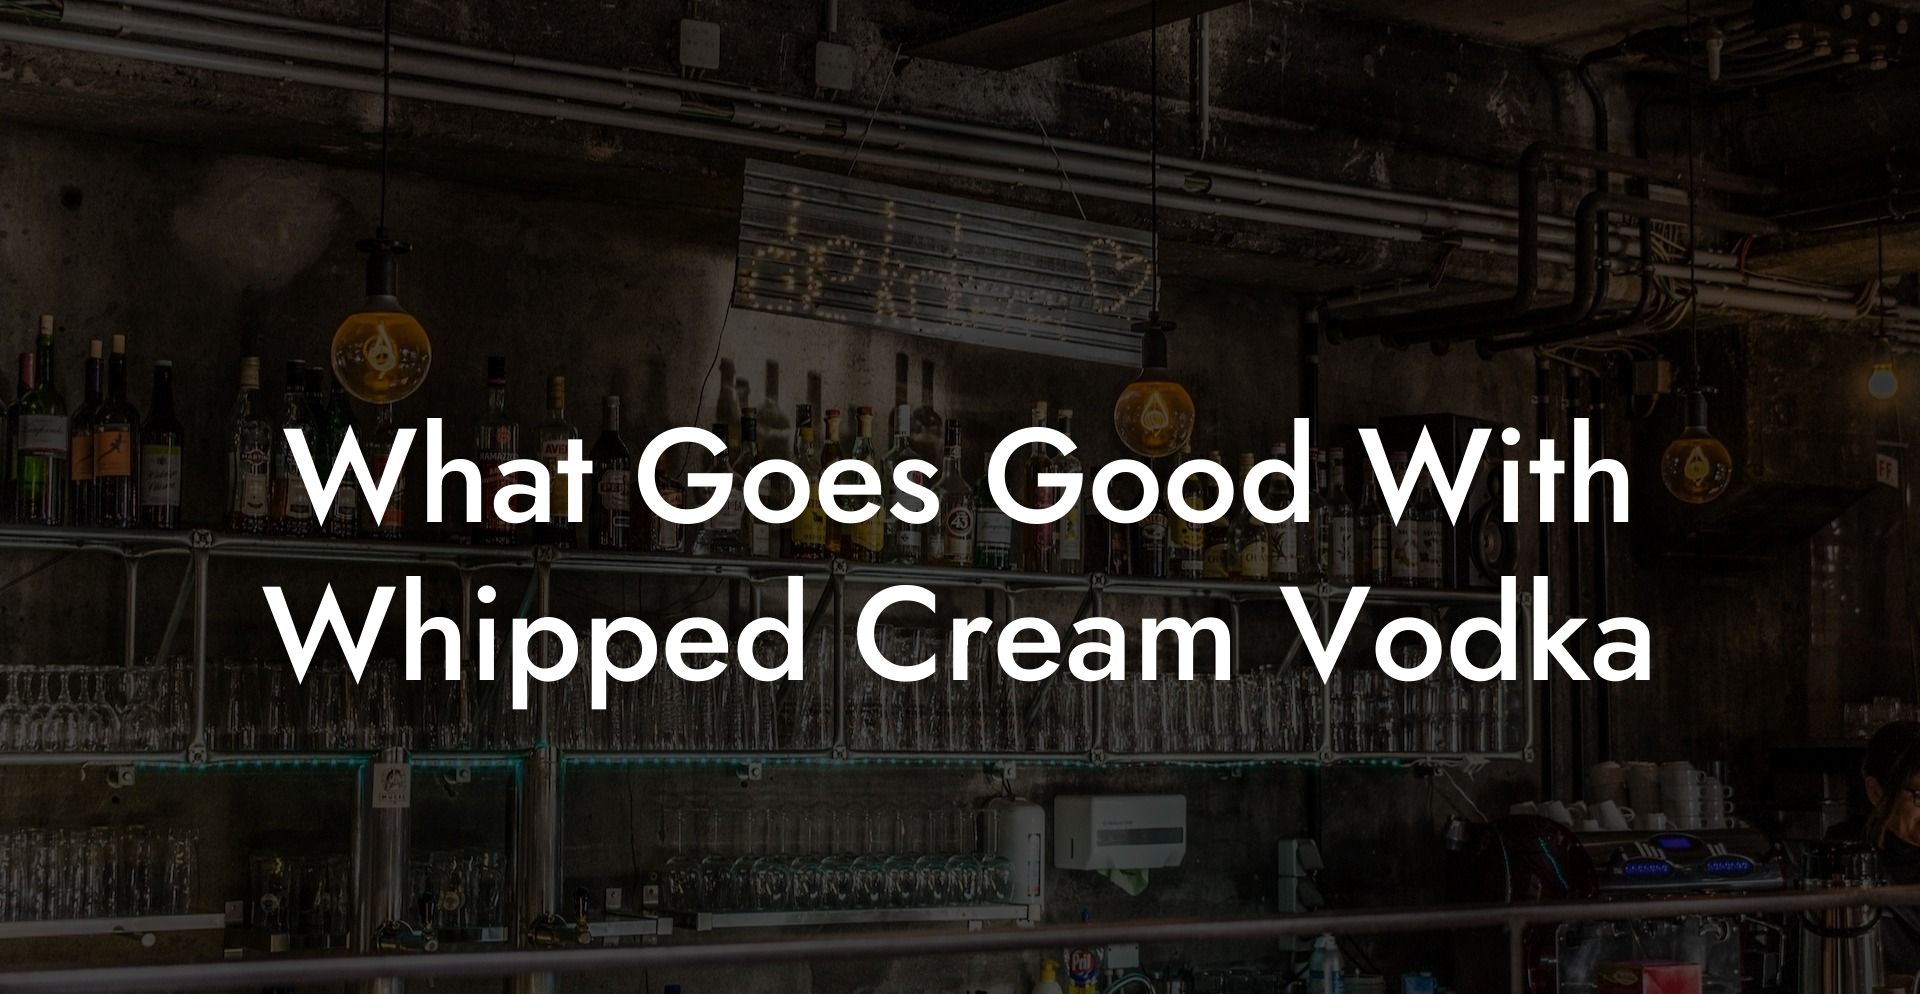 What Goes Good With Whipped Cream Vodka